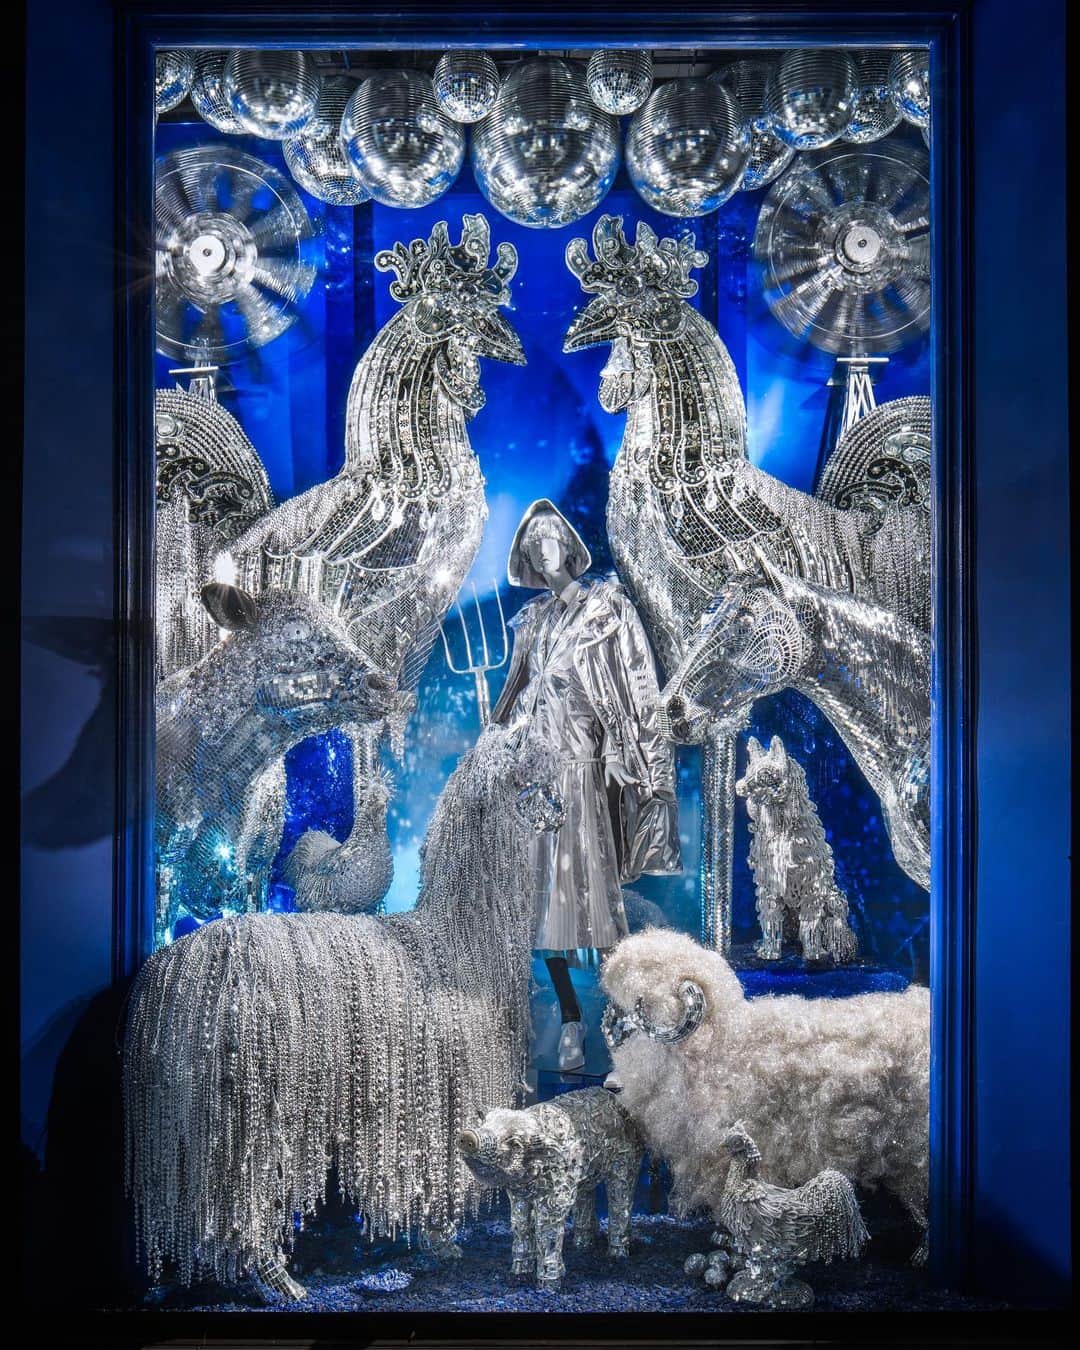 Bergdorf Goodmanのインスタグラム：「THE HOLIDAYS WINDOWS 🌟 Last night, we revealed our spectacular holiday windows! This year's theme, Isn’t It Brilliant, is a dazzling display of bright ideas and illuminating artistry designed to inspire and enchant.  Here: “First Light” which depicts a fantastical farmscape at sunrise.  Discover all the windows now at 5th Avenue & 58th Street.  📷: @rickyzehavi」